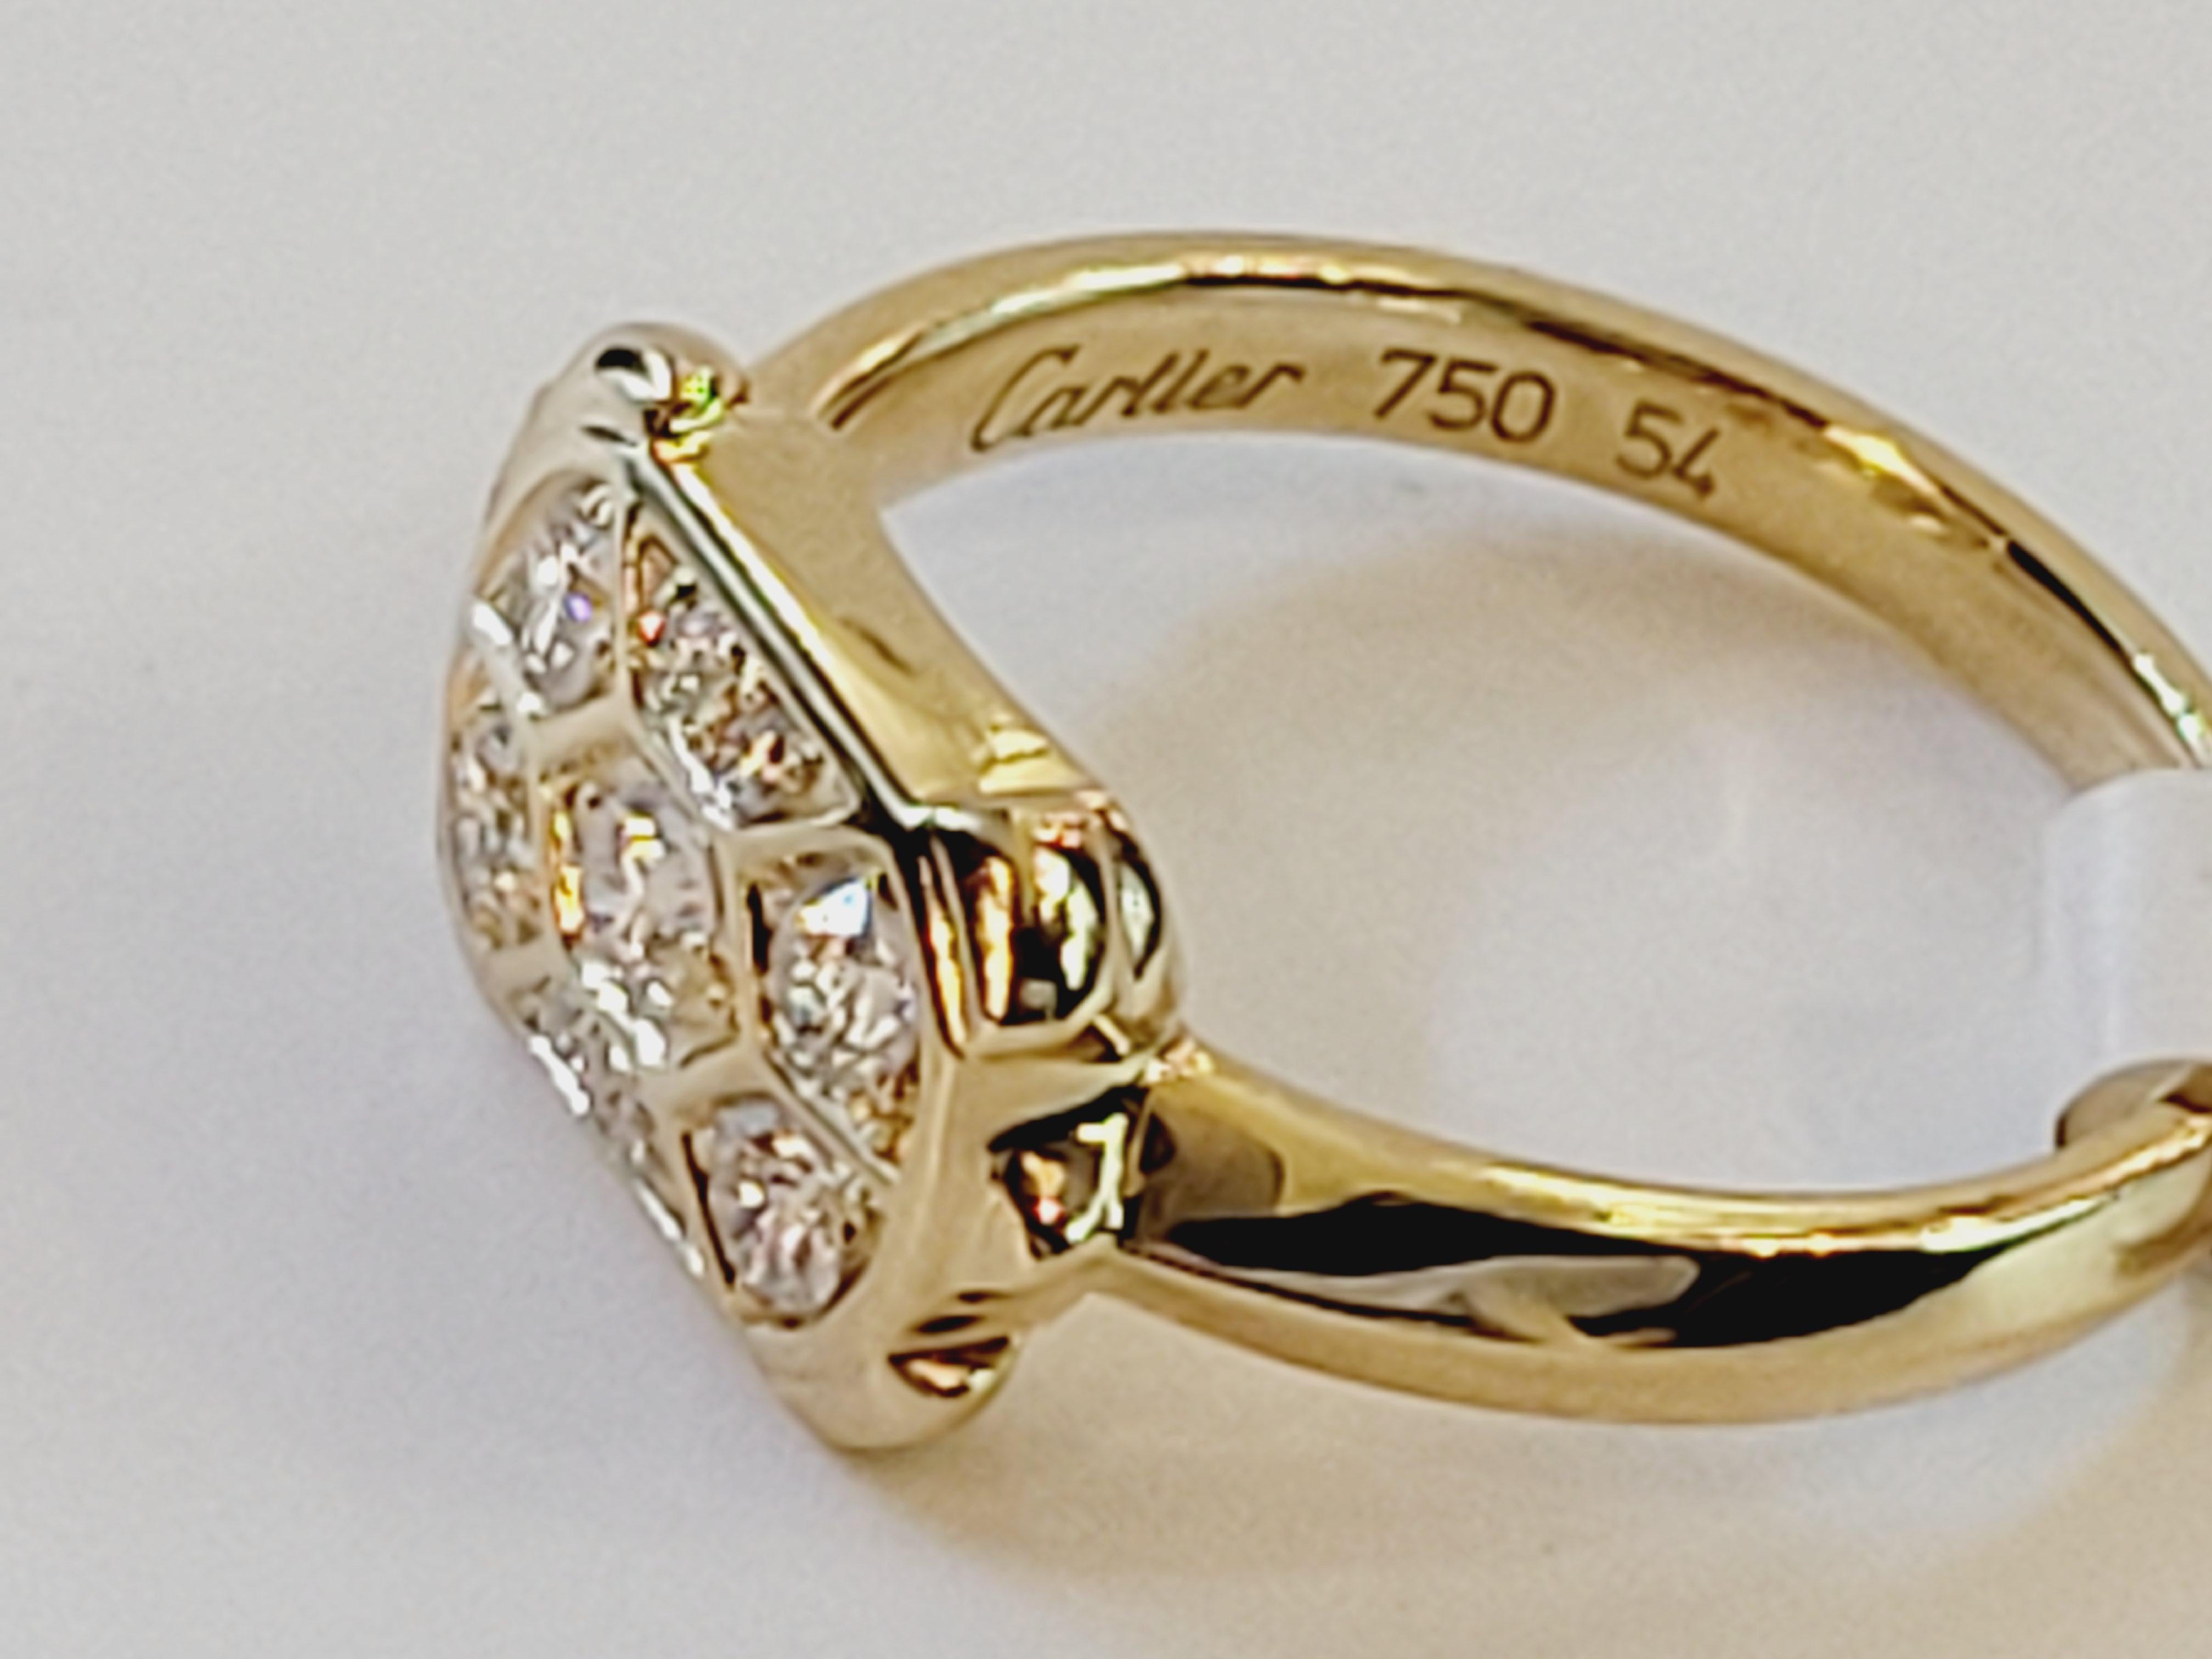 Brand Cartier 
Turtle Motif
Mind Condition
18K Rose gold
Main Stone Diamond 
Diamond 0.383 cts                
Ring size 7
Ring Width 2.2mm
Ring Weight 5.5gr 
Cartier  ring box included